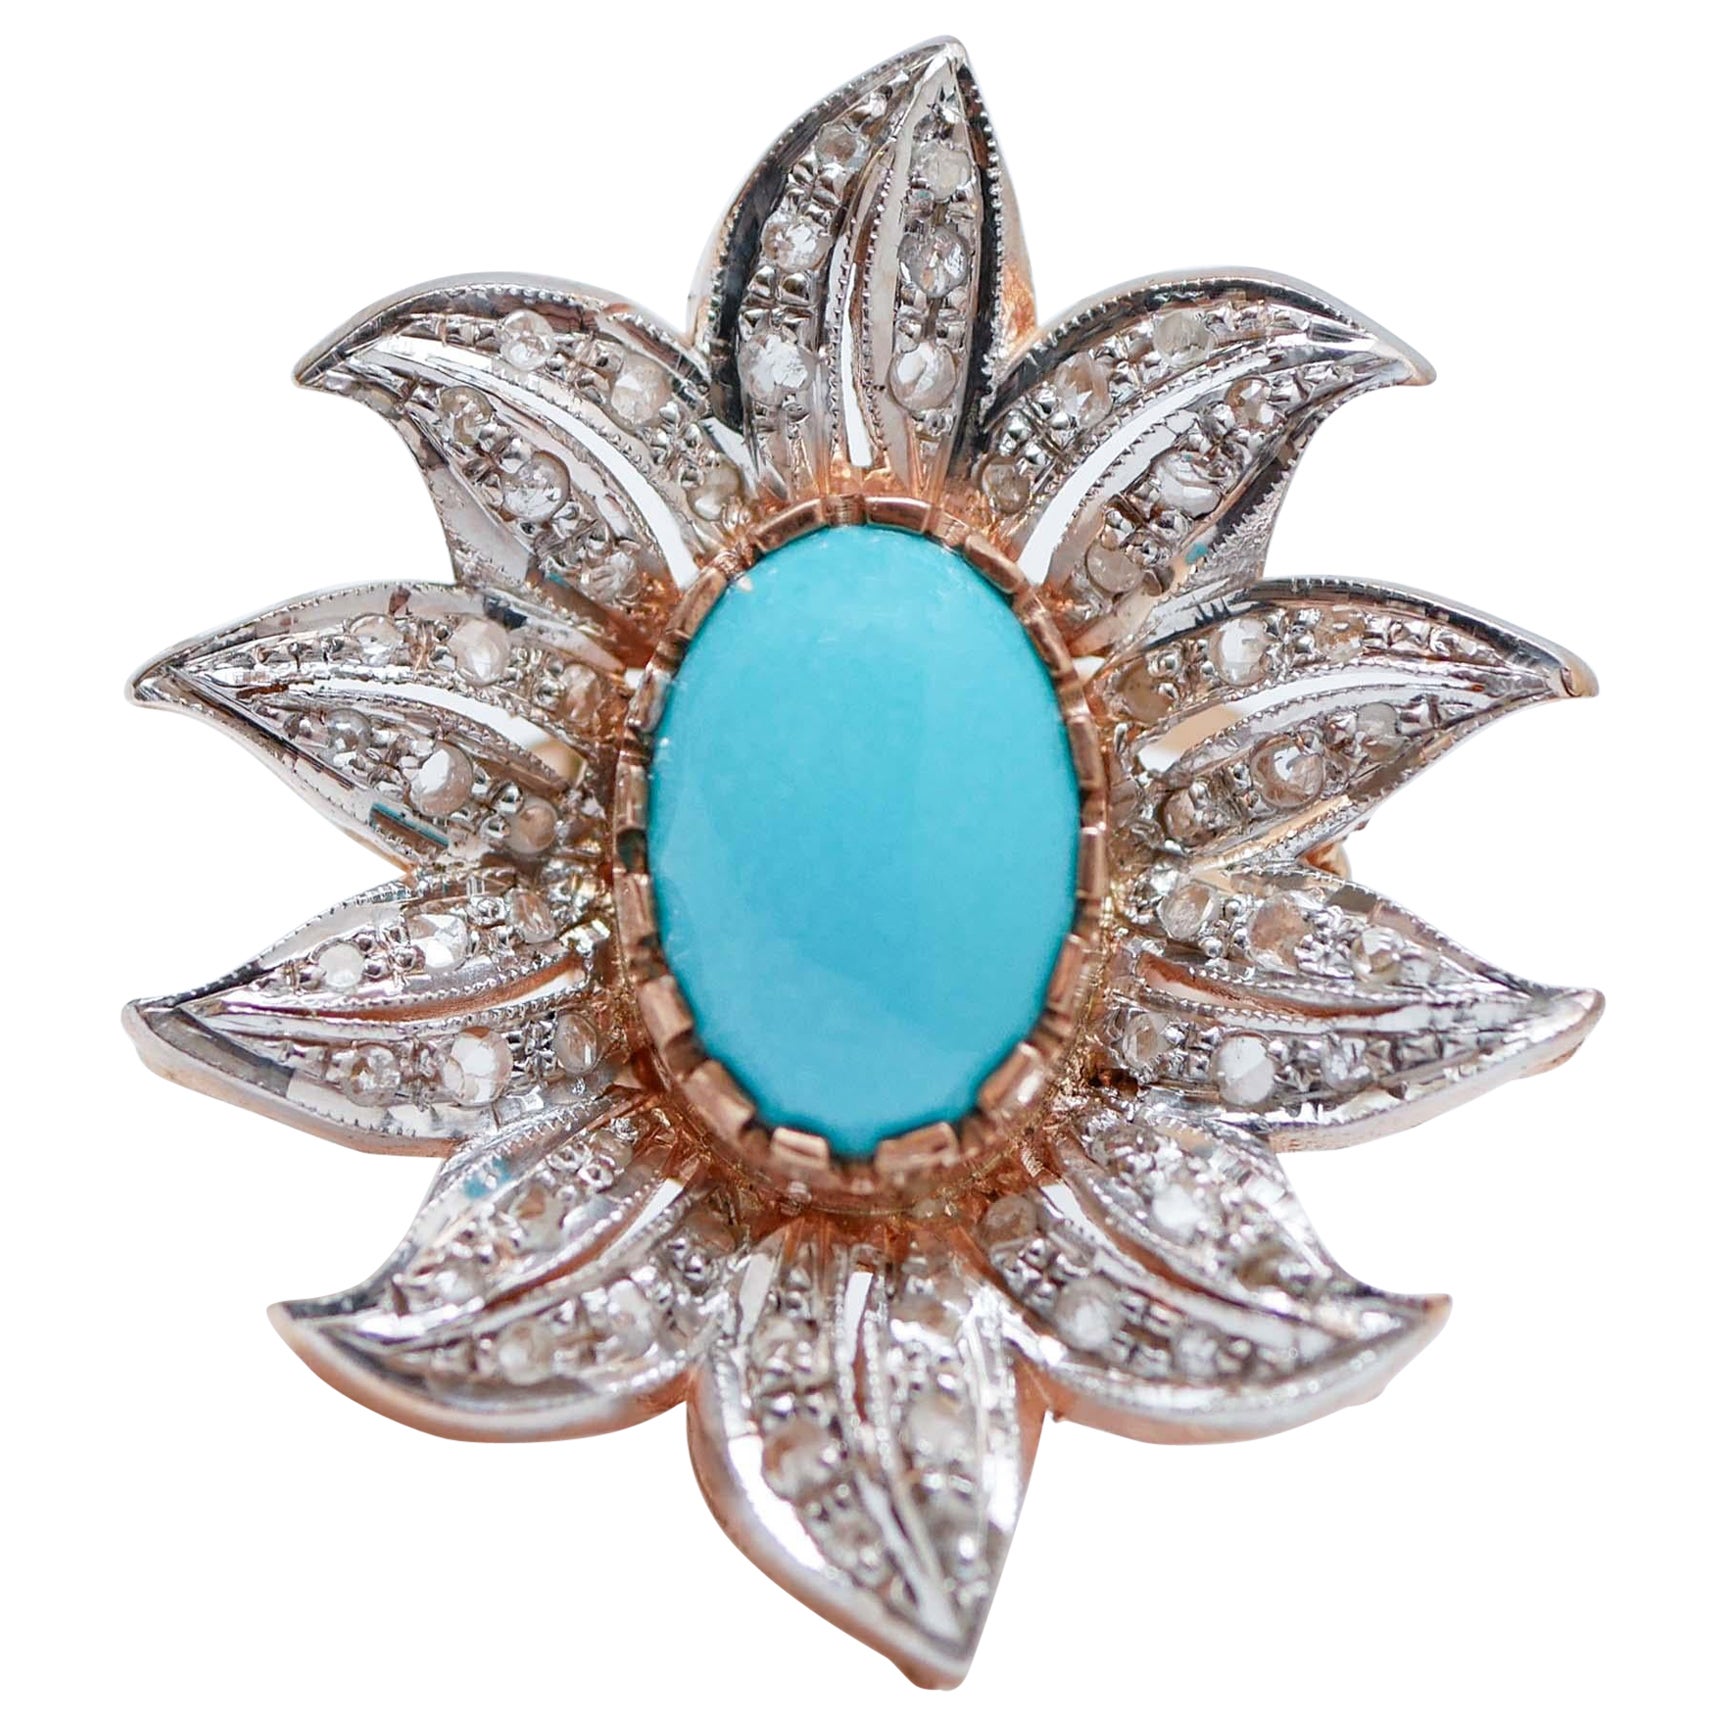 Turquoise, Diamonds, Rose Gold and Silver Flower Ring.